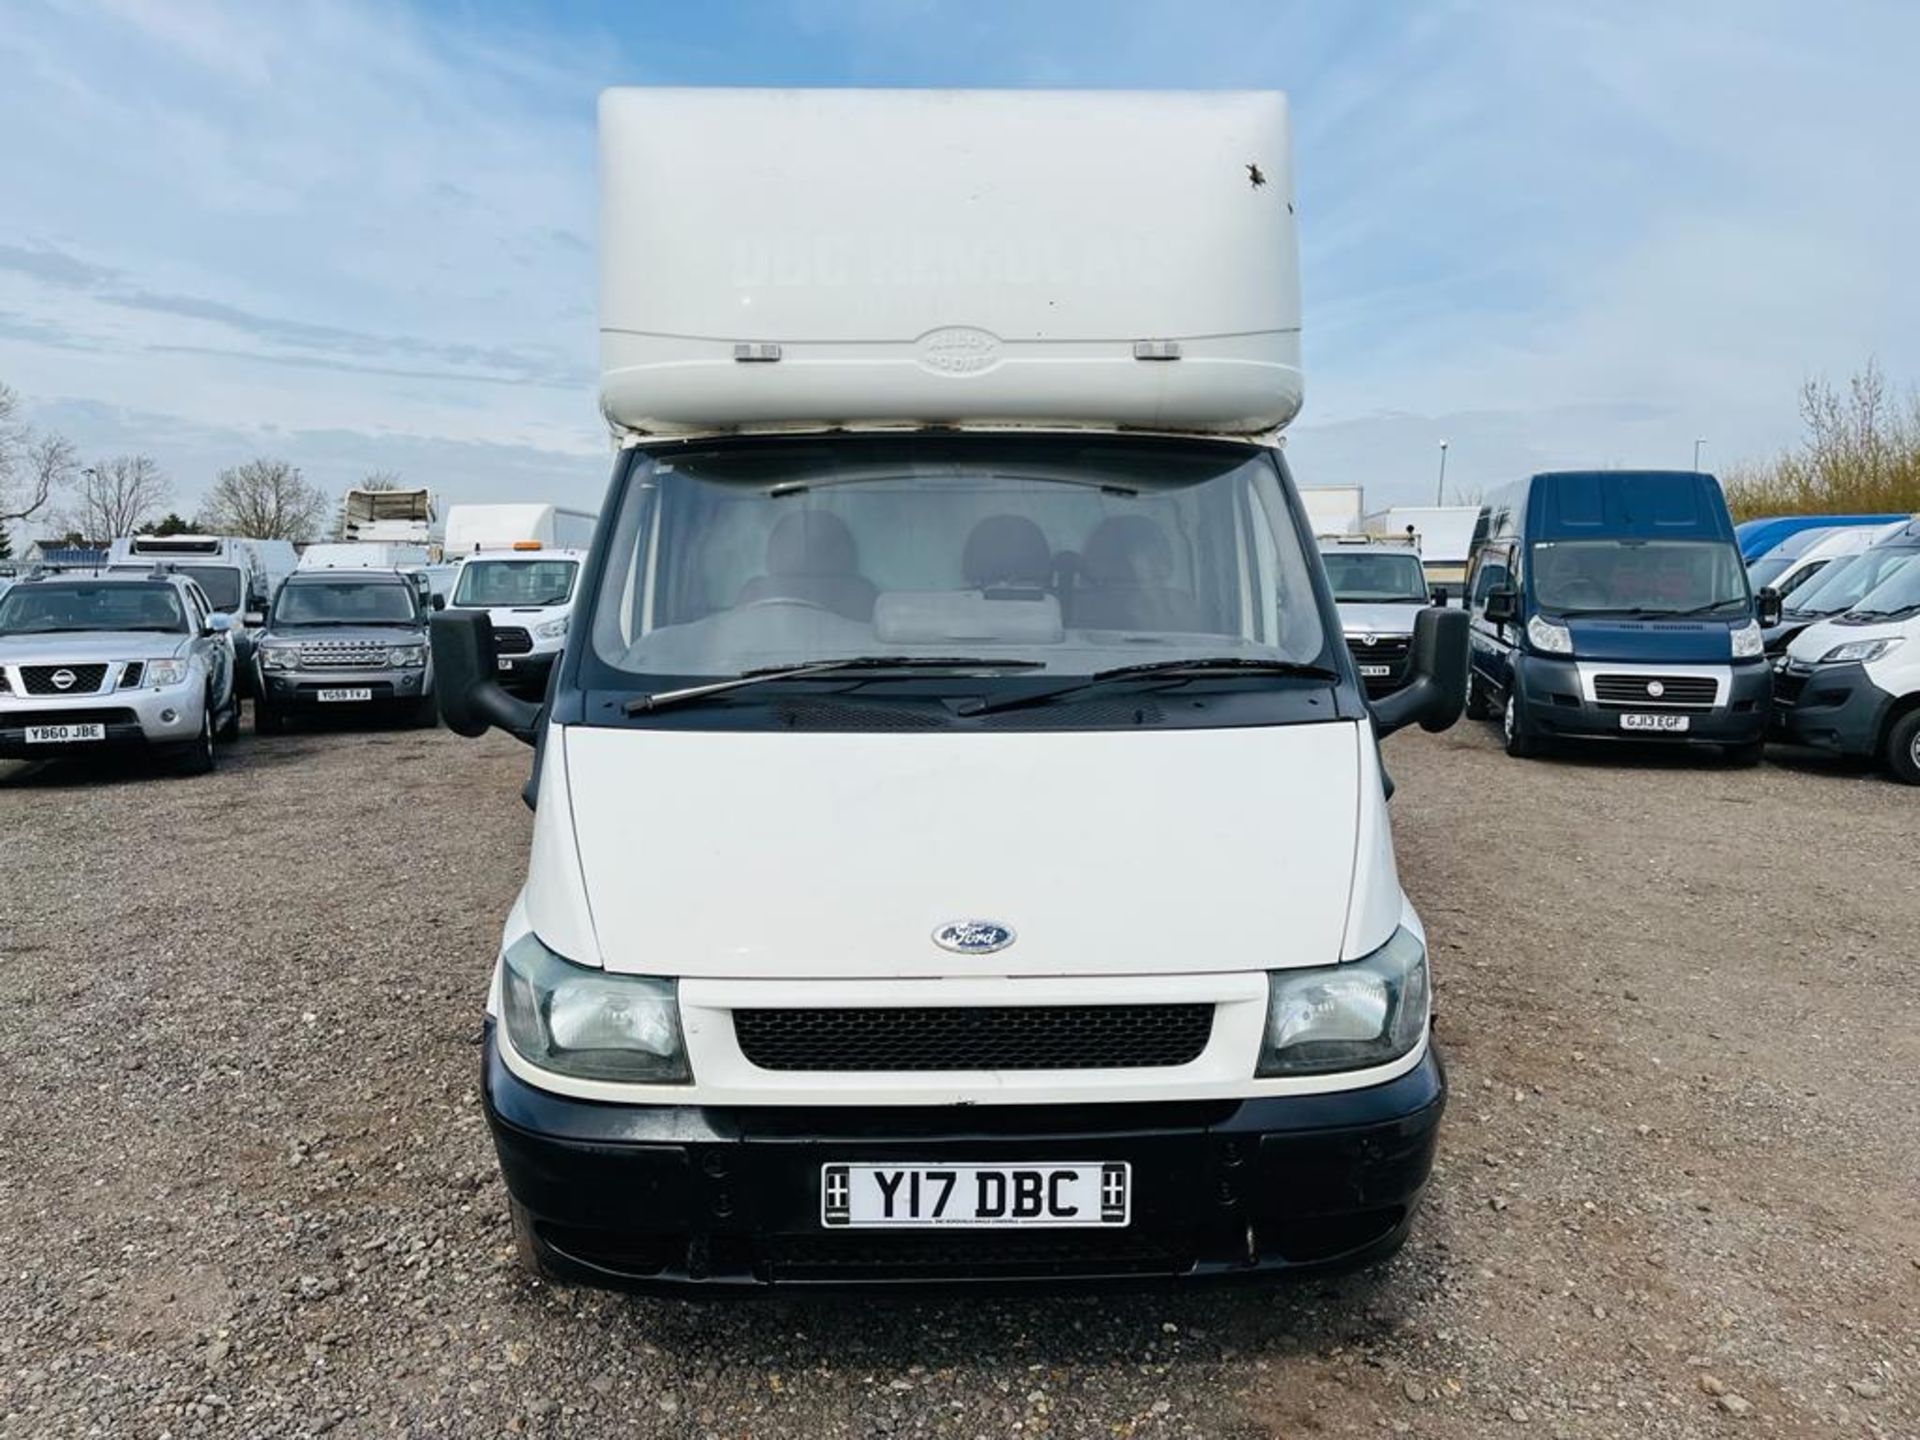 ** ON SALE ** Ford Transit 2.4 T350 TDCI 110 Luton Body LWB 2.2 2006 - Tail Lift - 6 Speed Manual - Image 2 of 21